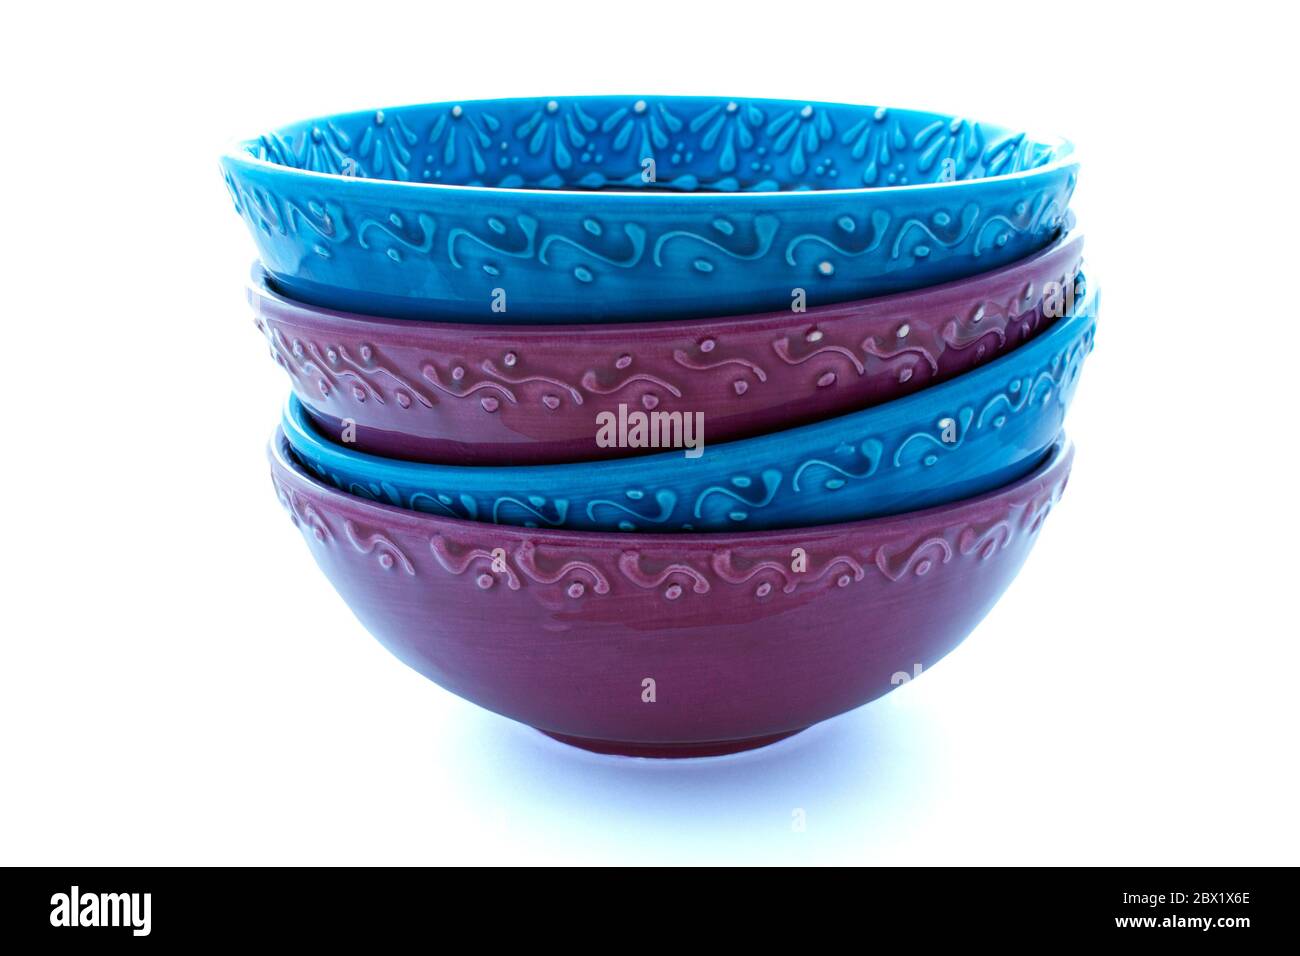 Four handmade blue and purple bowls stacked at angles Stock Photo